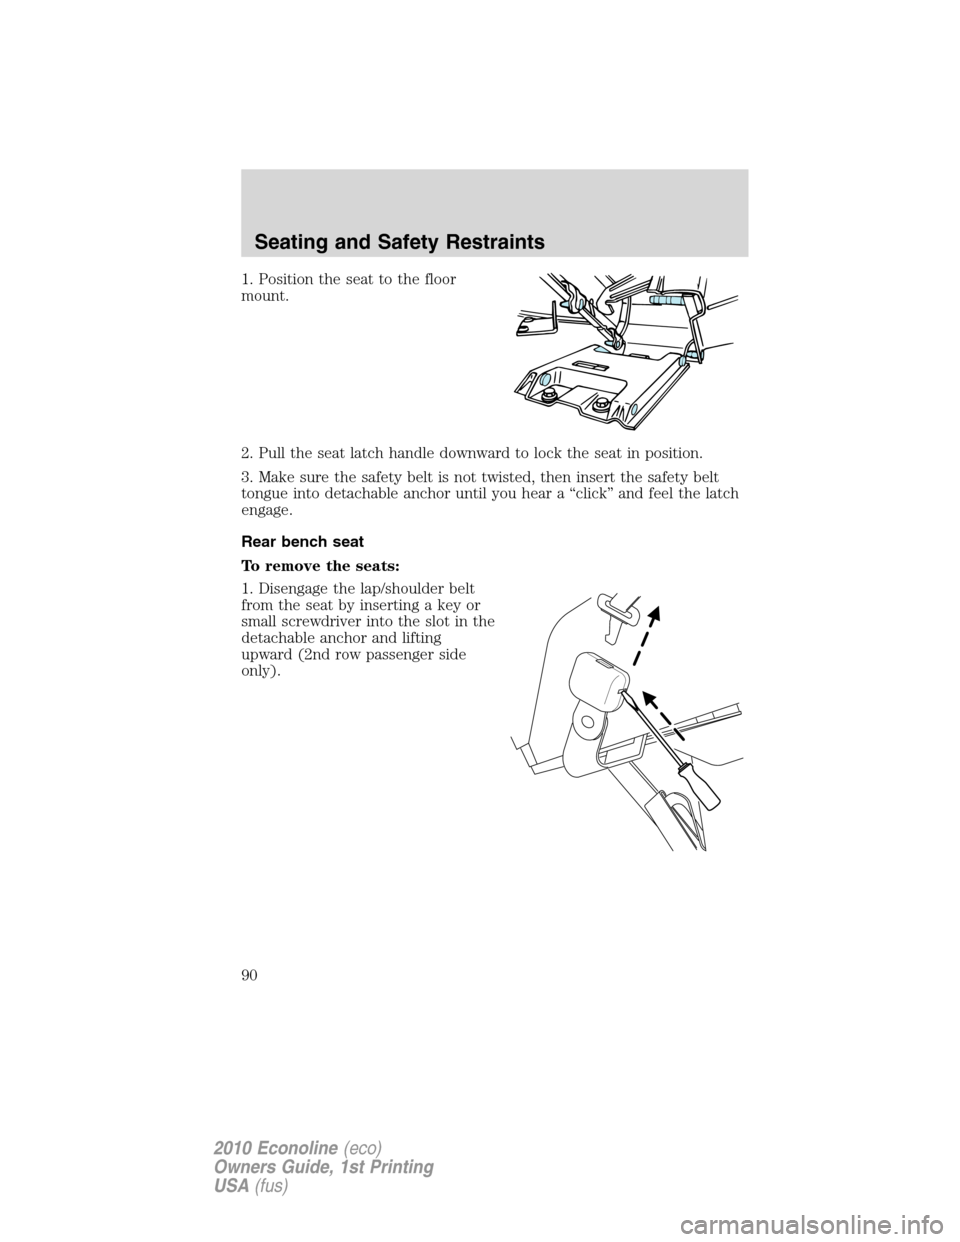 FORD E SERIES 2010 4.G Owners Manual 1. Position the seat to the floor
mount.
2. Pull the seat latch handle downward to lock the seat in position.
3. Make sure the safety belt is not twisted, then insert the safety belt
tongue into detac